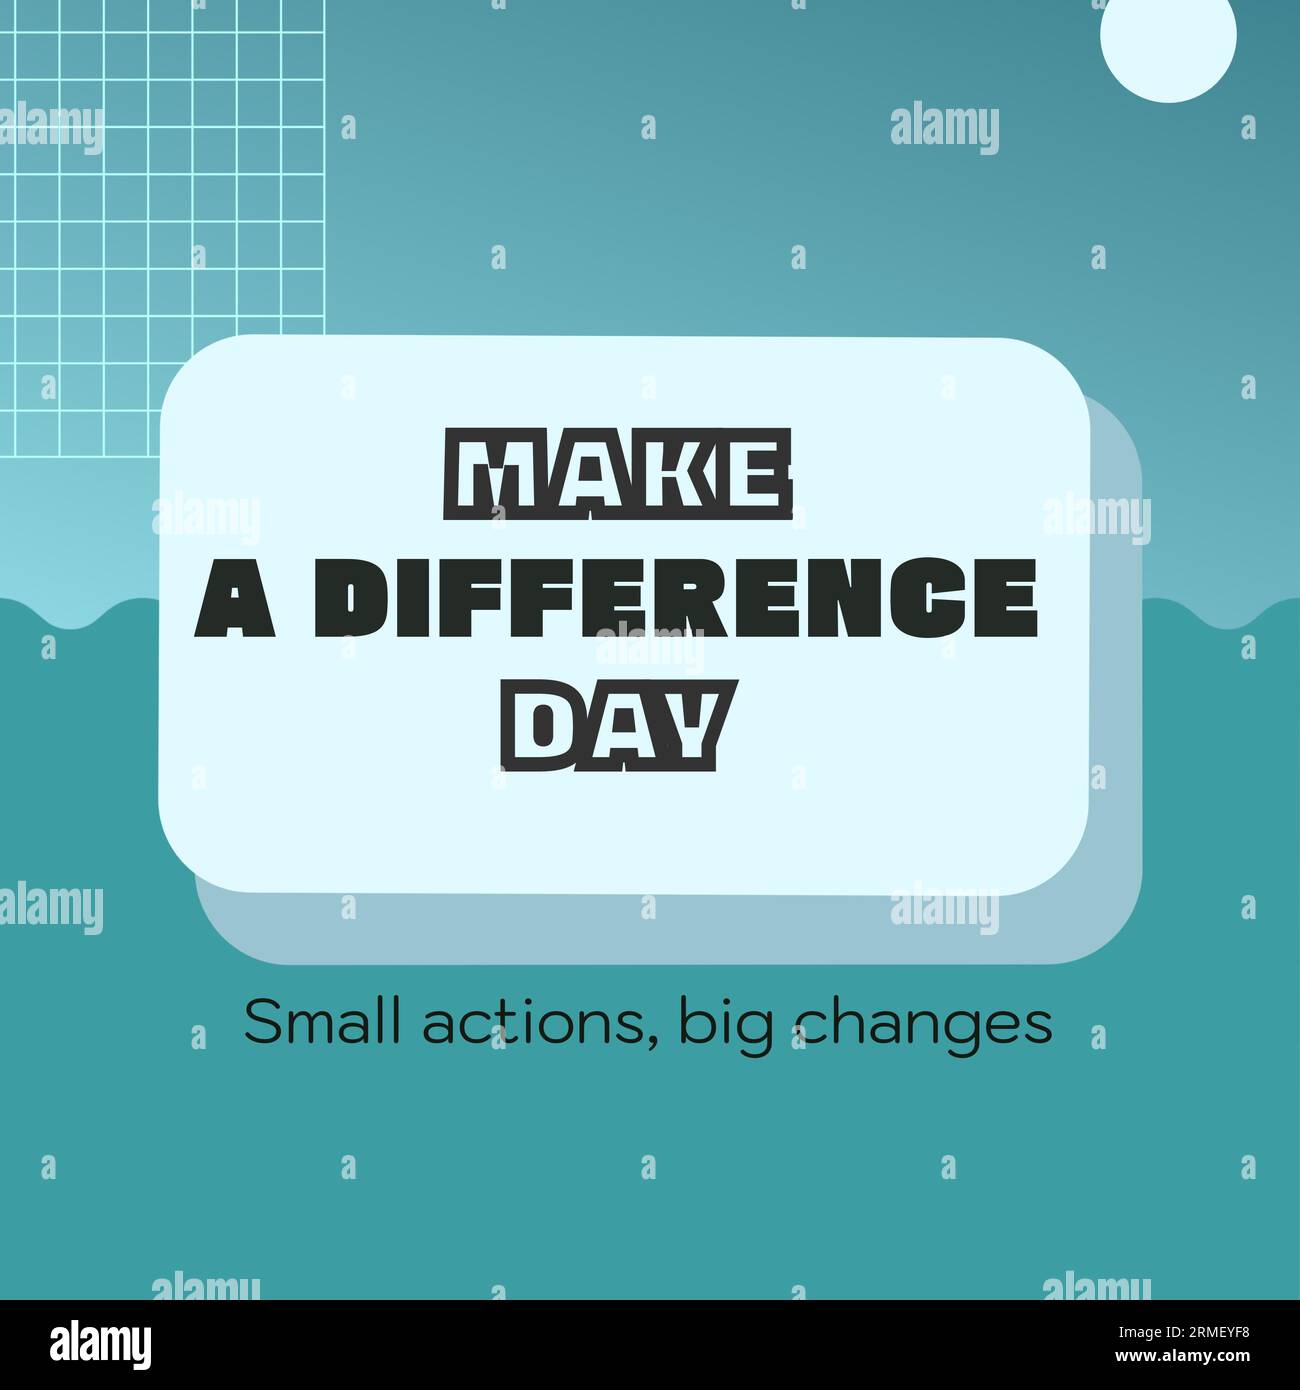 Illustration of make a difference day and small actions, big changes text over sea, moon and grid Stock Photo